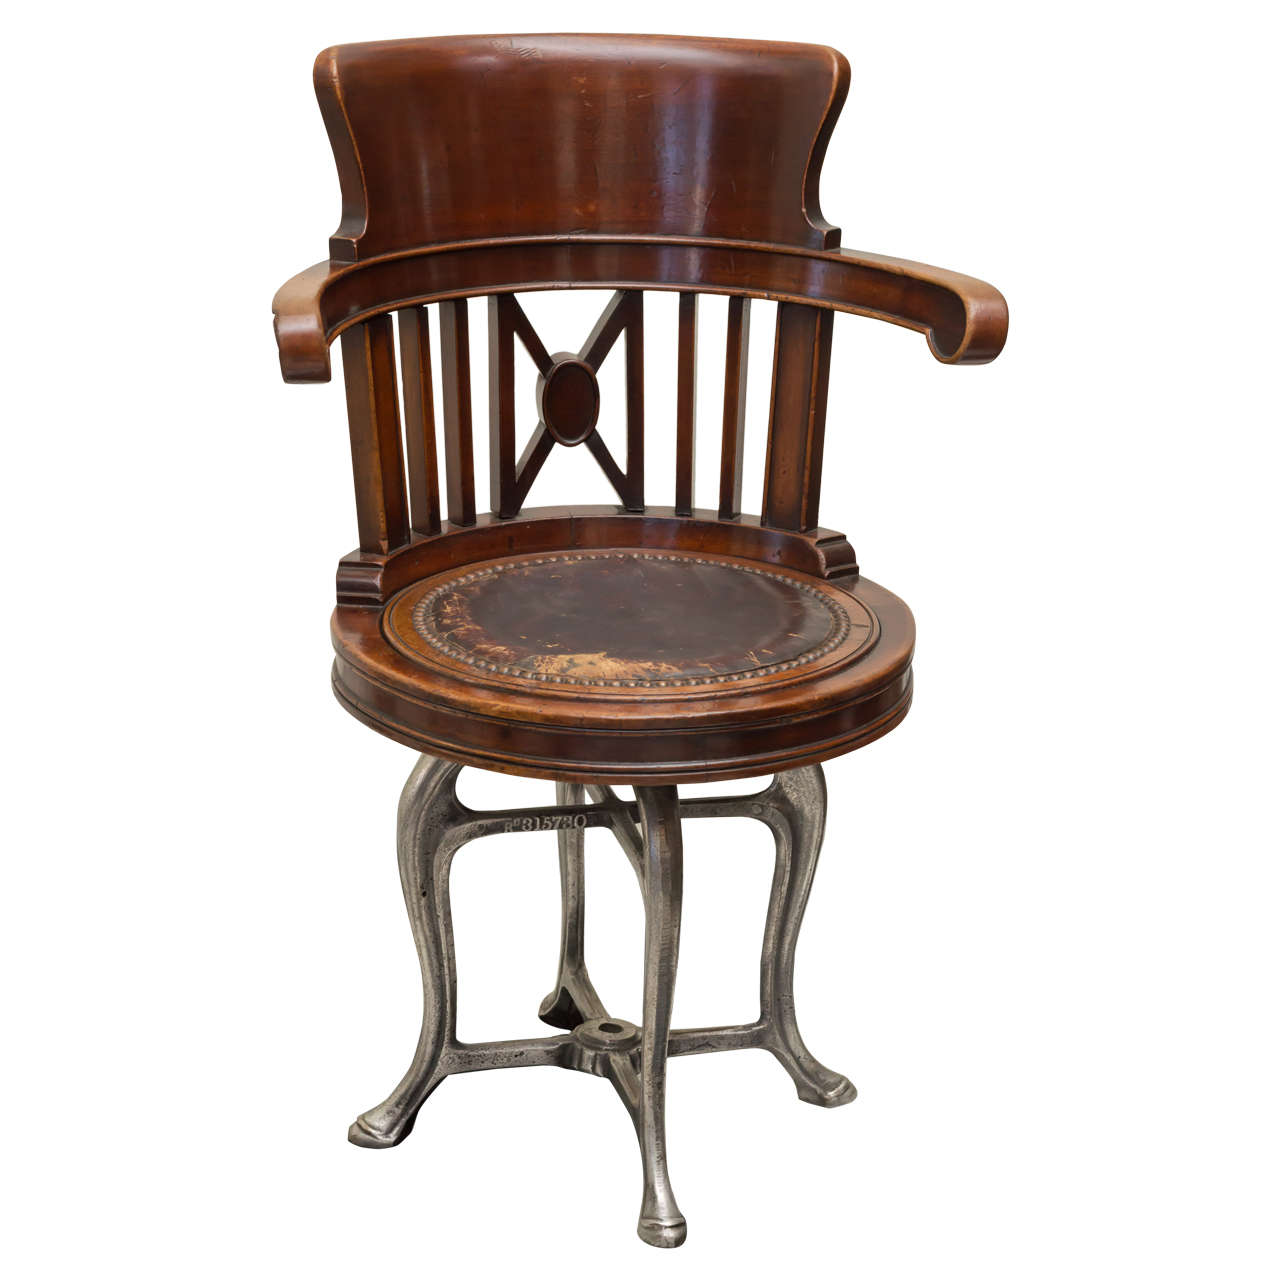 Late 19th C American Ship's Chair in Mahogany and Nickel Iron Swivel Base